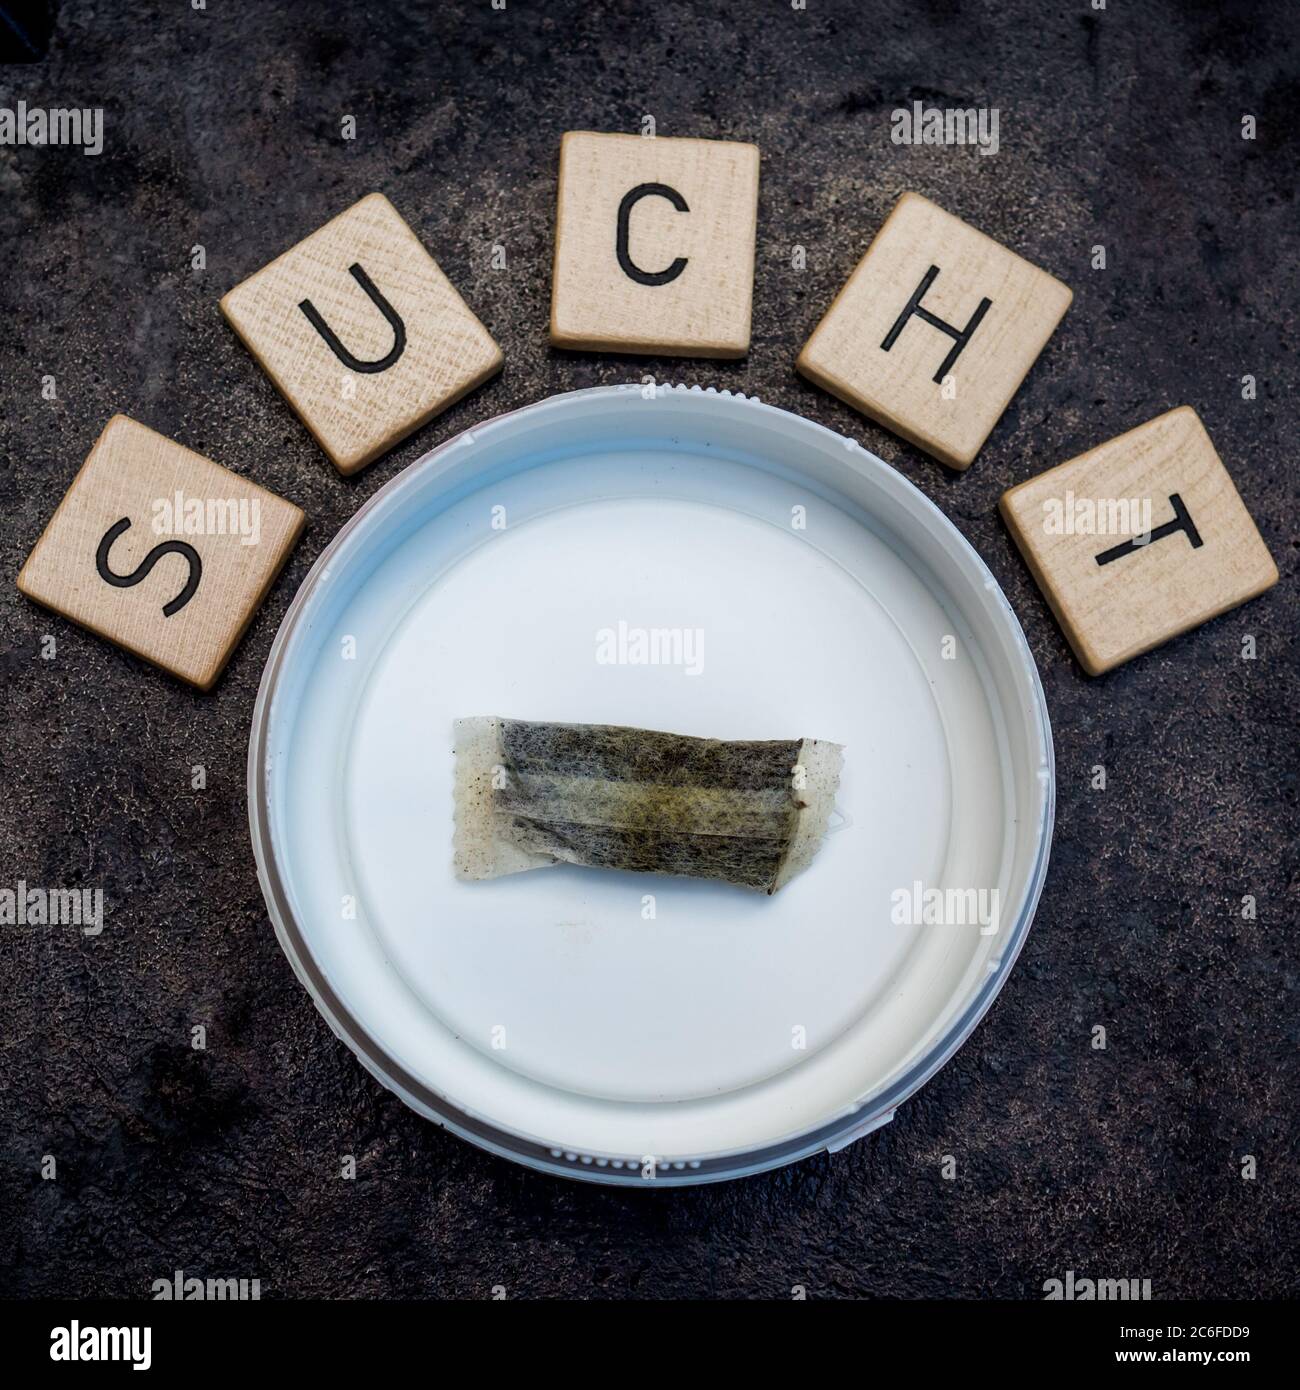 one pouch swedish chewing tobacco snus is left over in a white round box isolated on grey cast iron surface, surrounded by wooden letter tiles, sucht Stock Photo